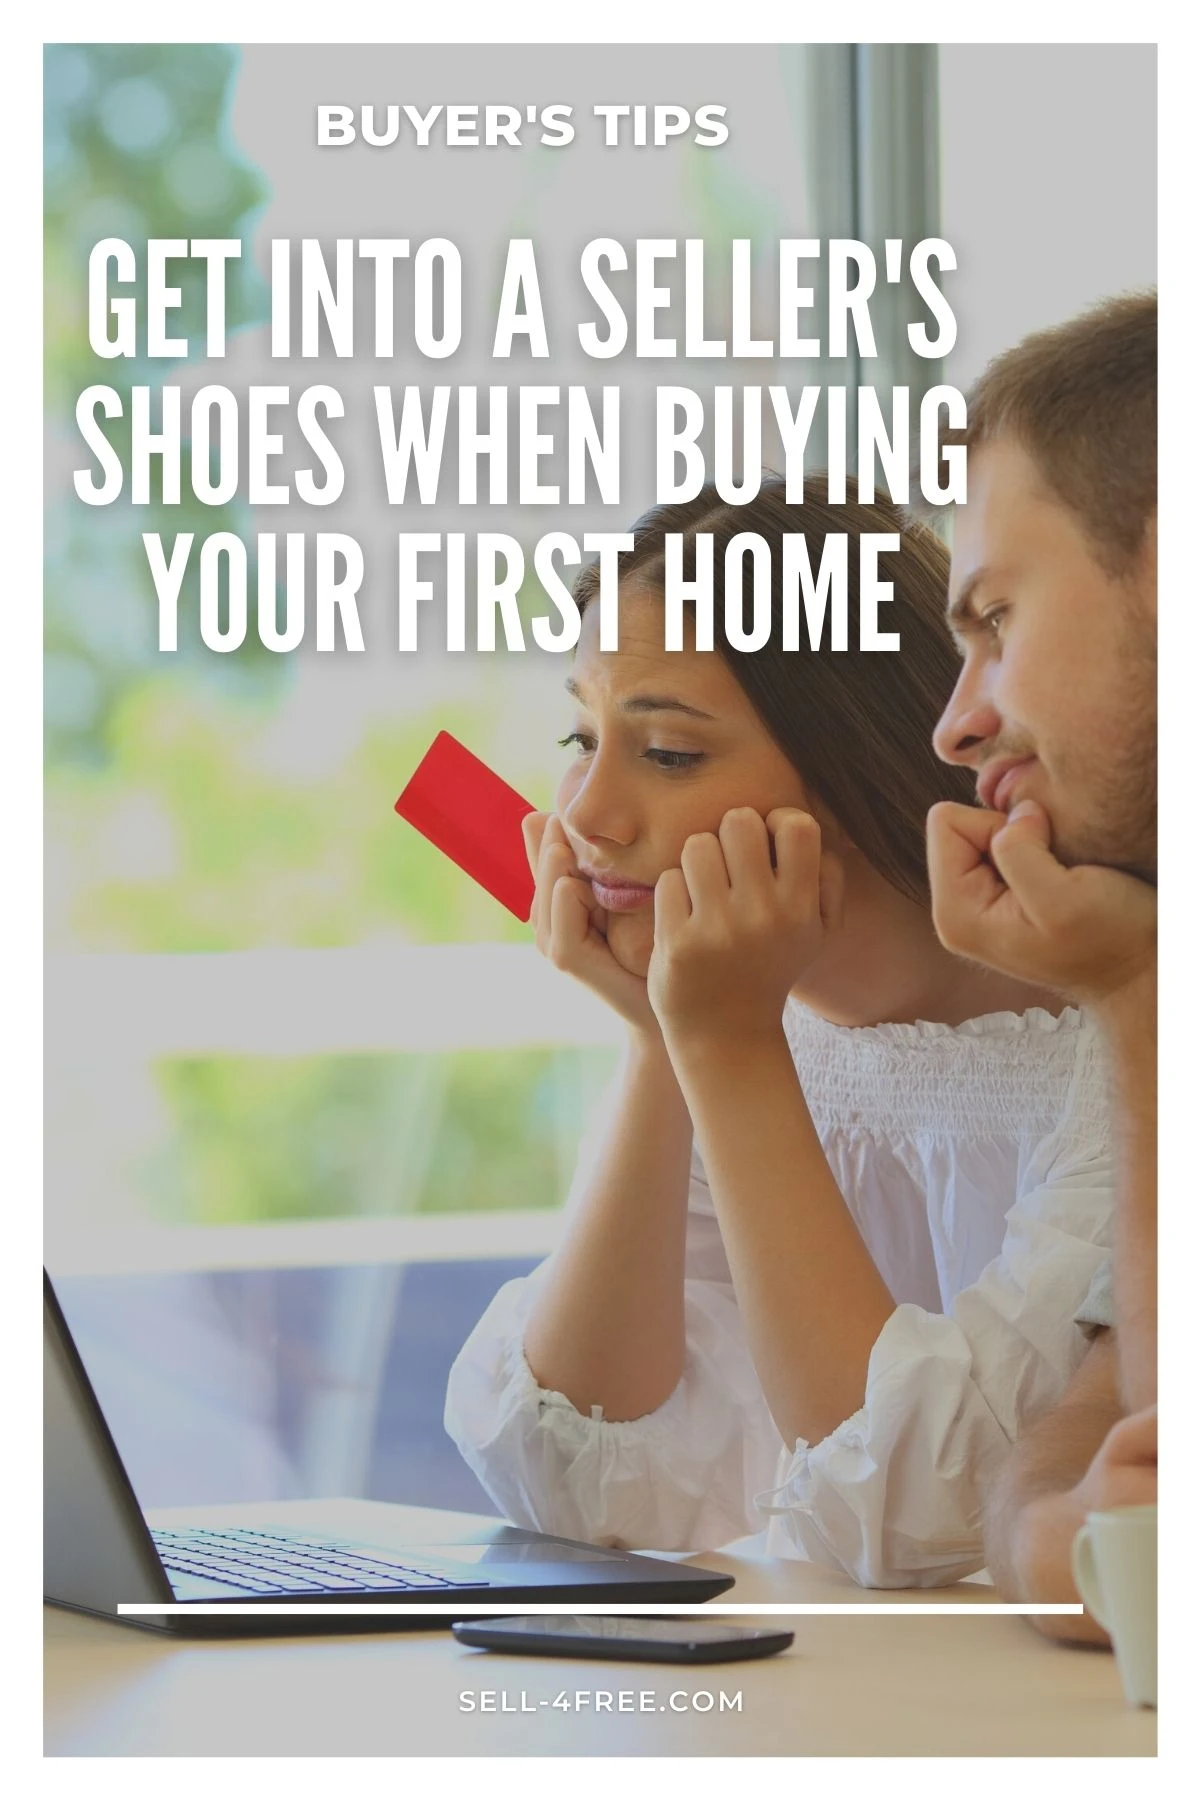 Get Into a Seller’s Shoes When Buying Your First Home